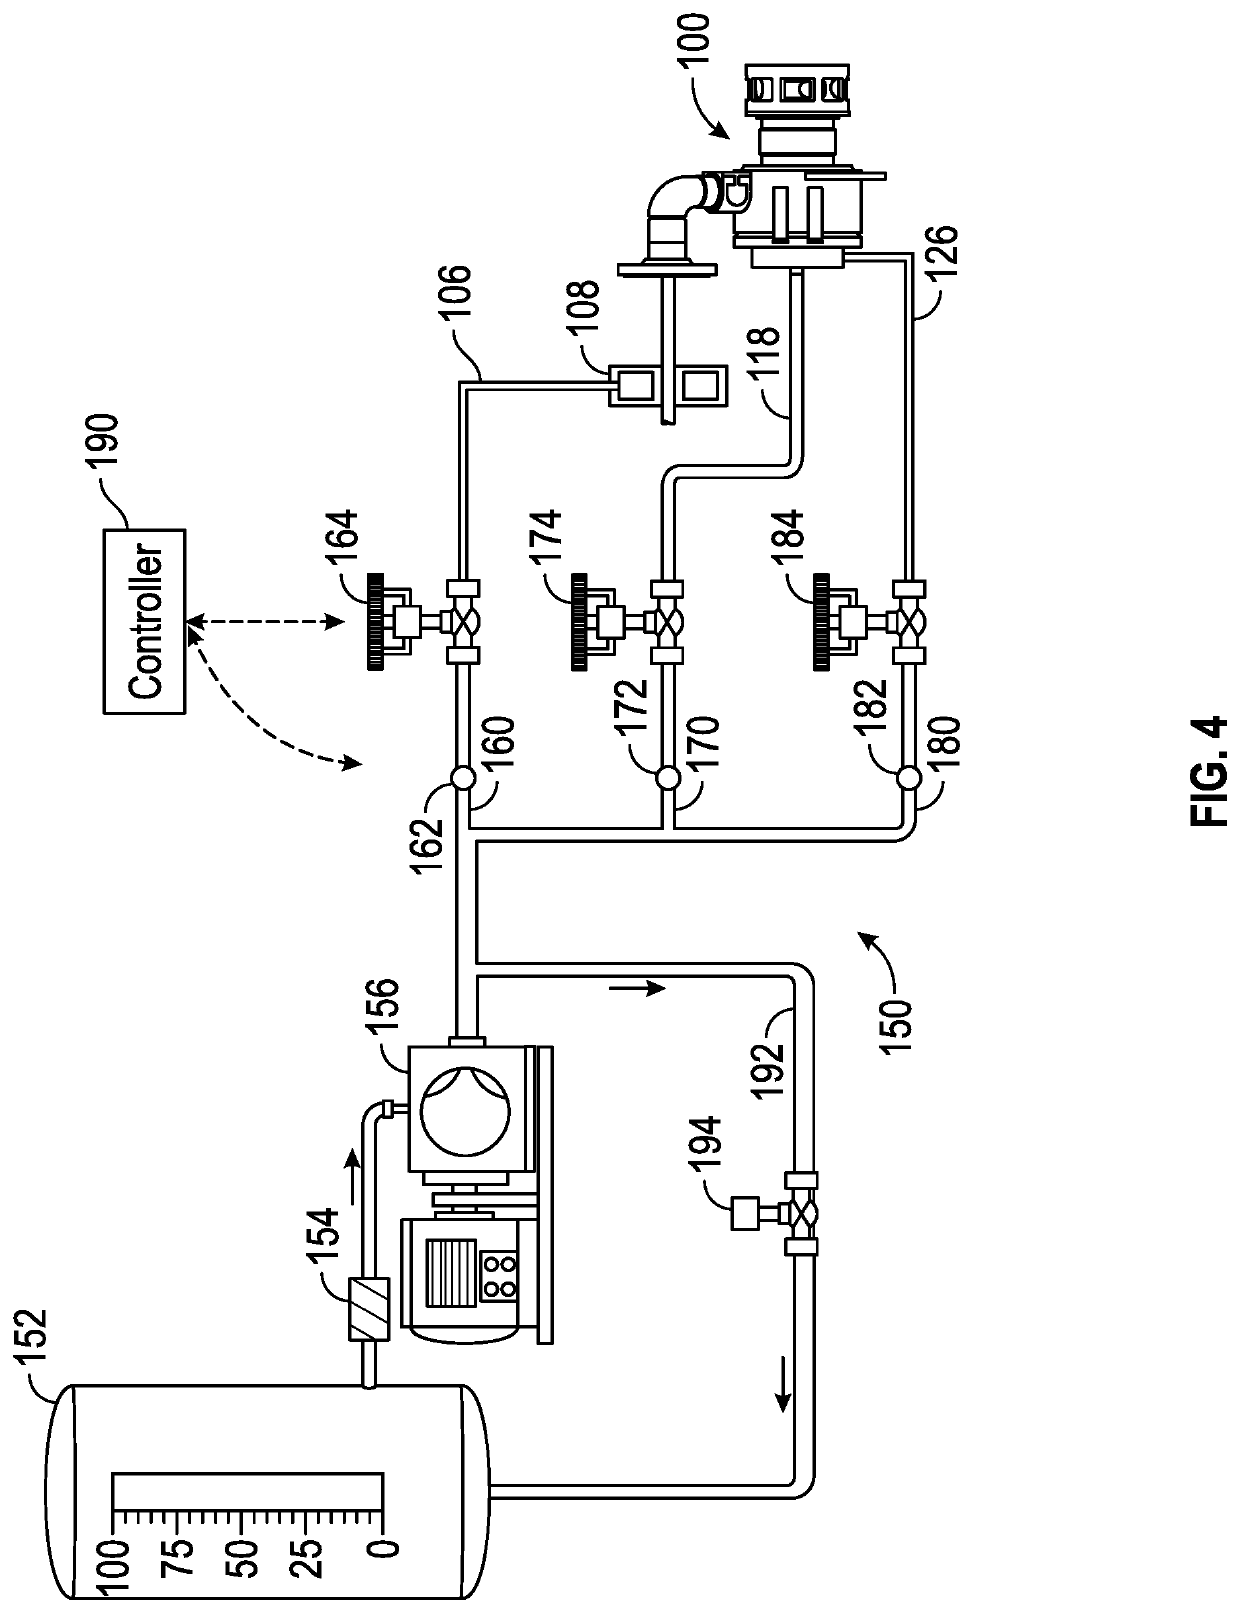 Independently controlled three stage water injection in a diffusion burner